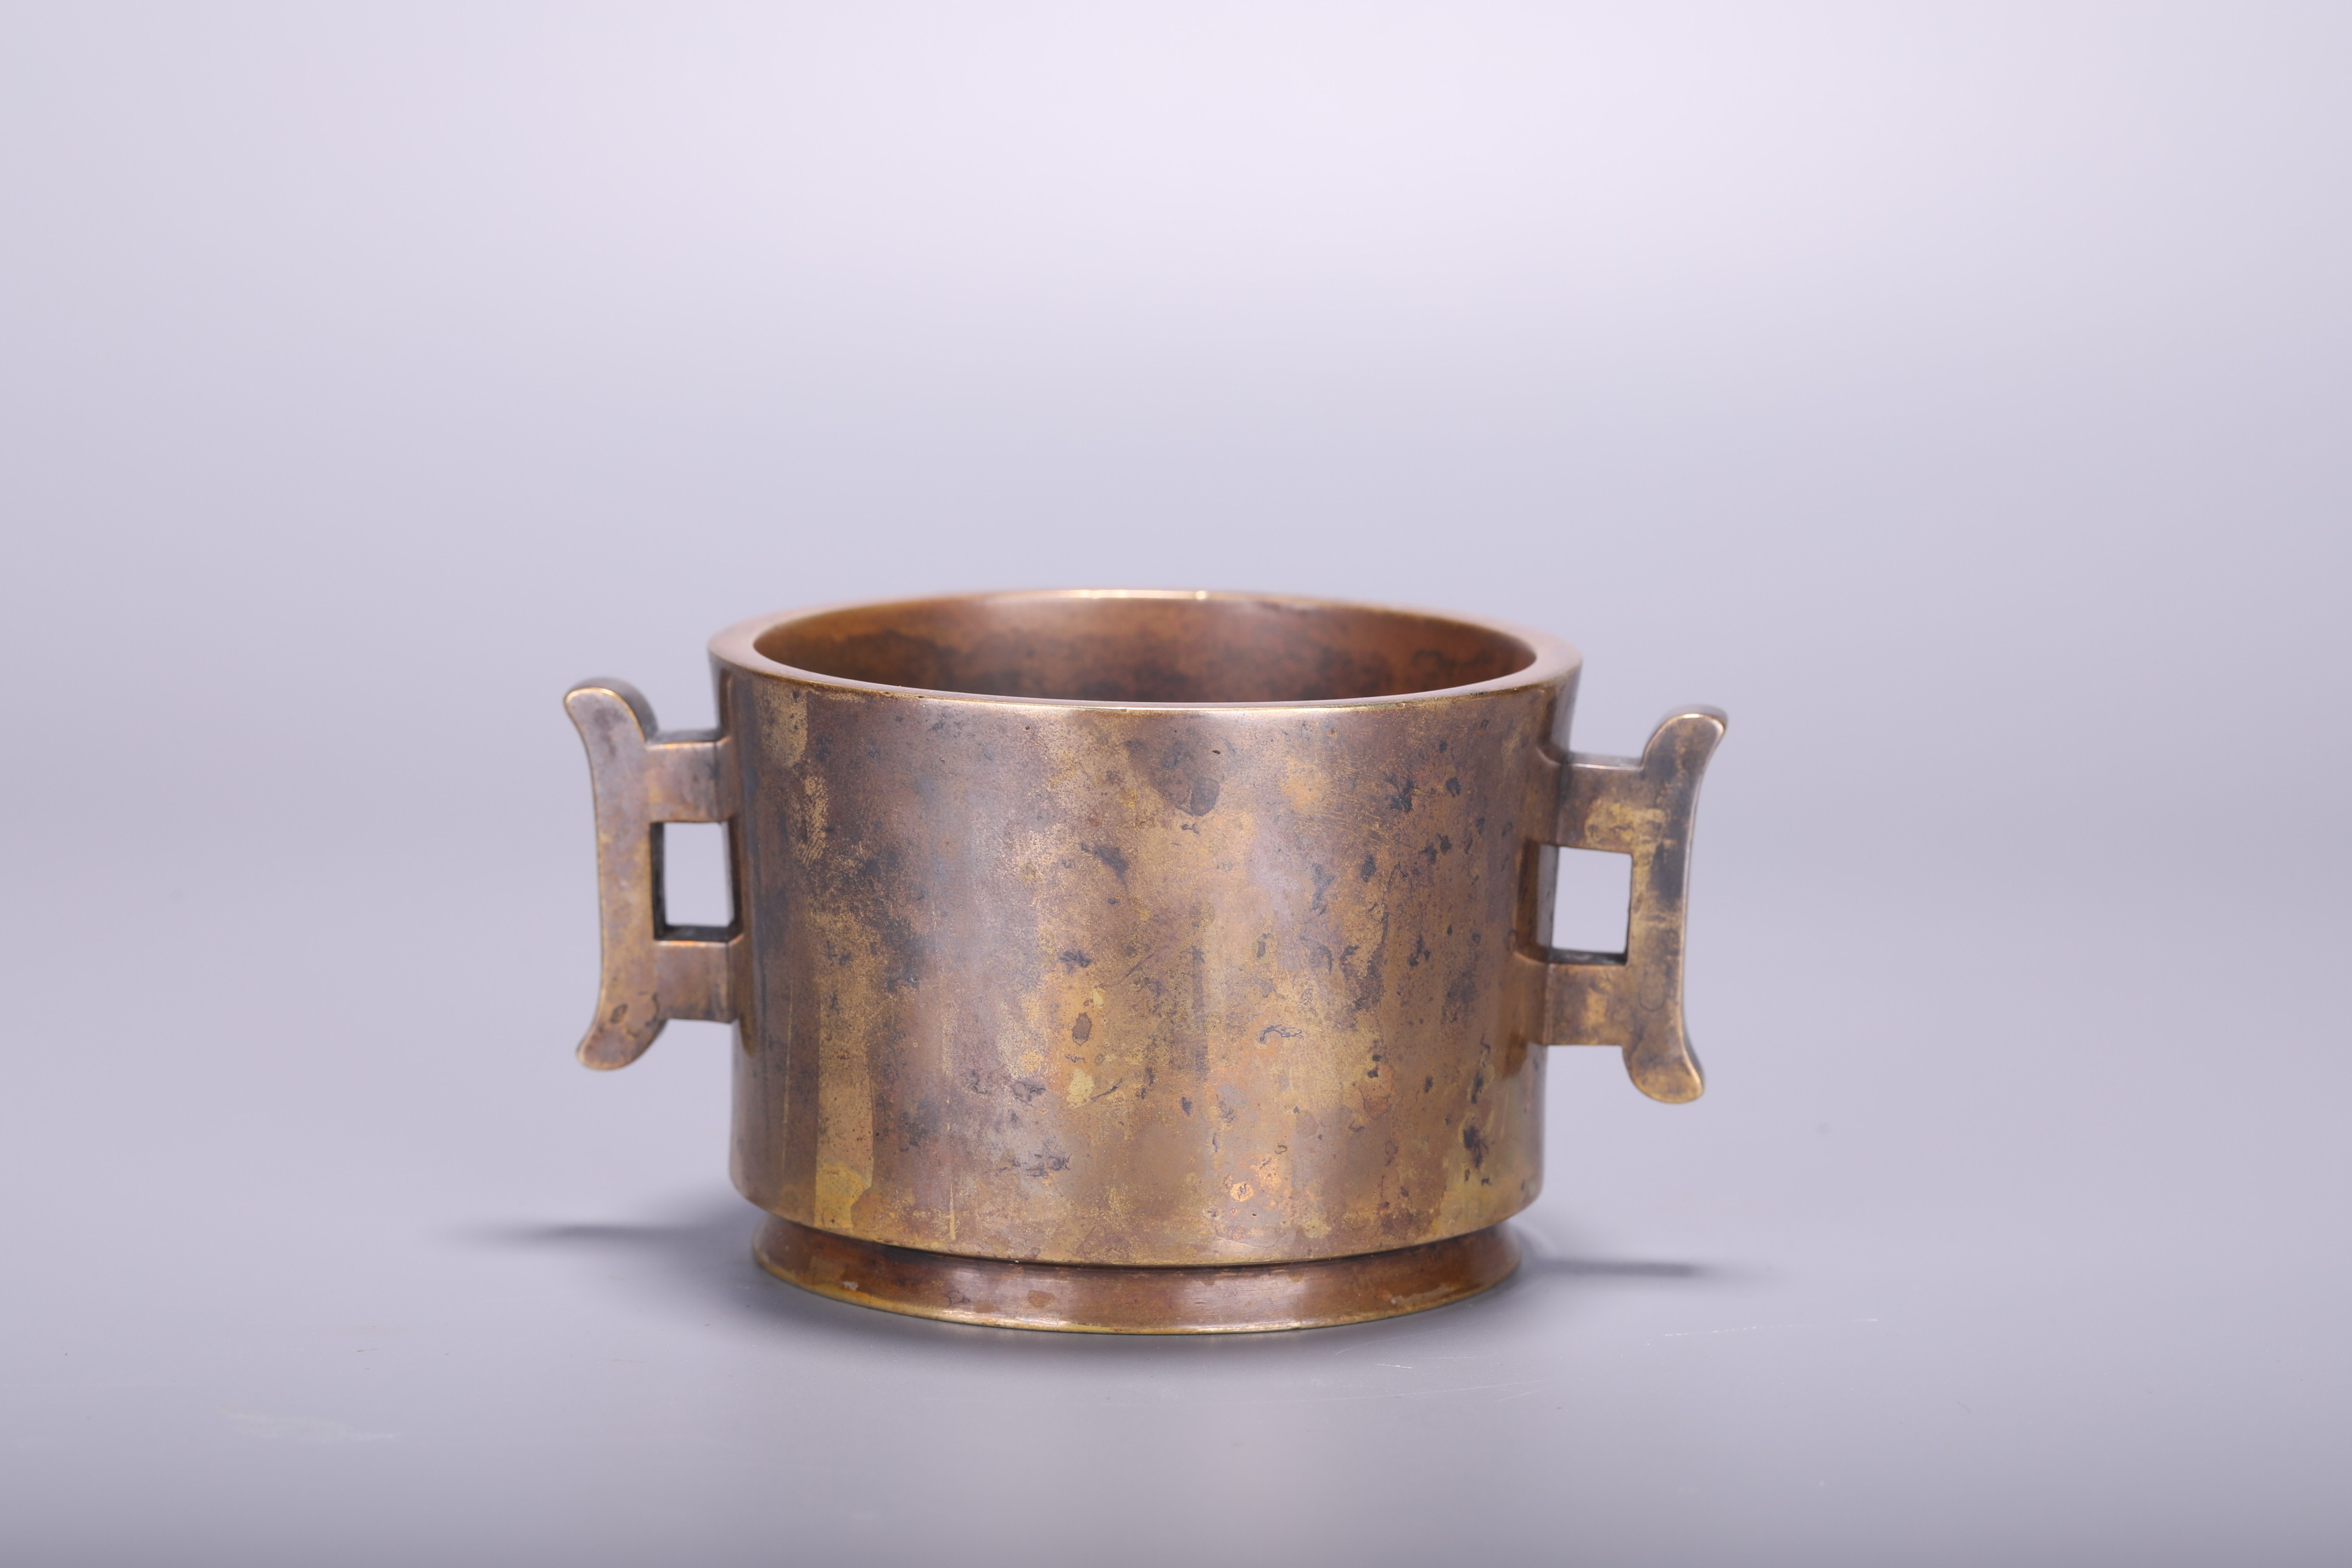 A Chinese bronze censer, H 6,4 - Dia 12,3 cm - Weight 1139 g - Image 2 of 4